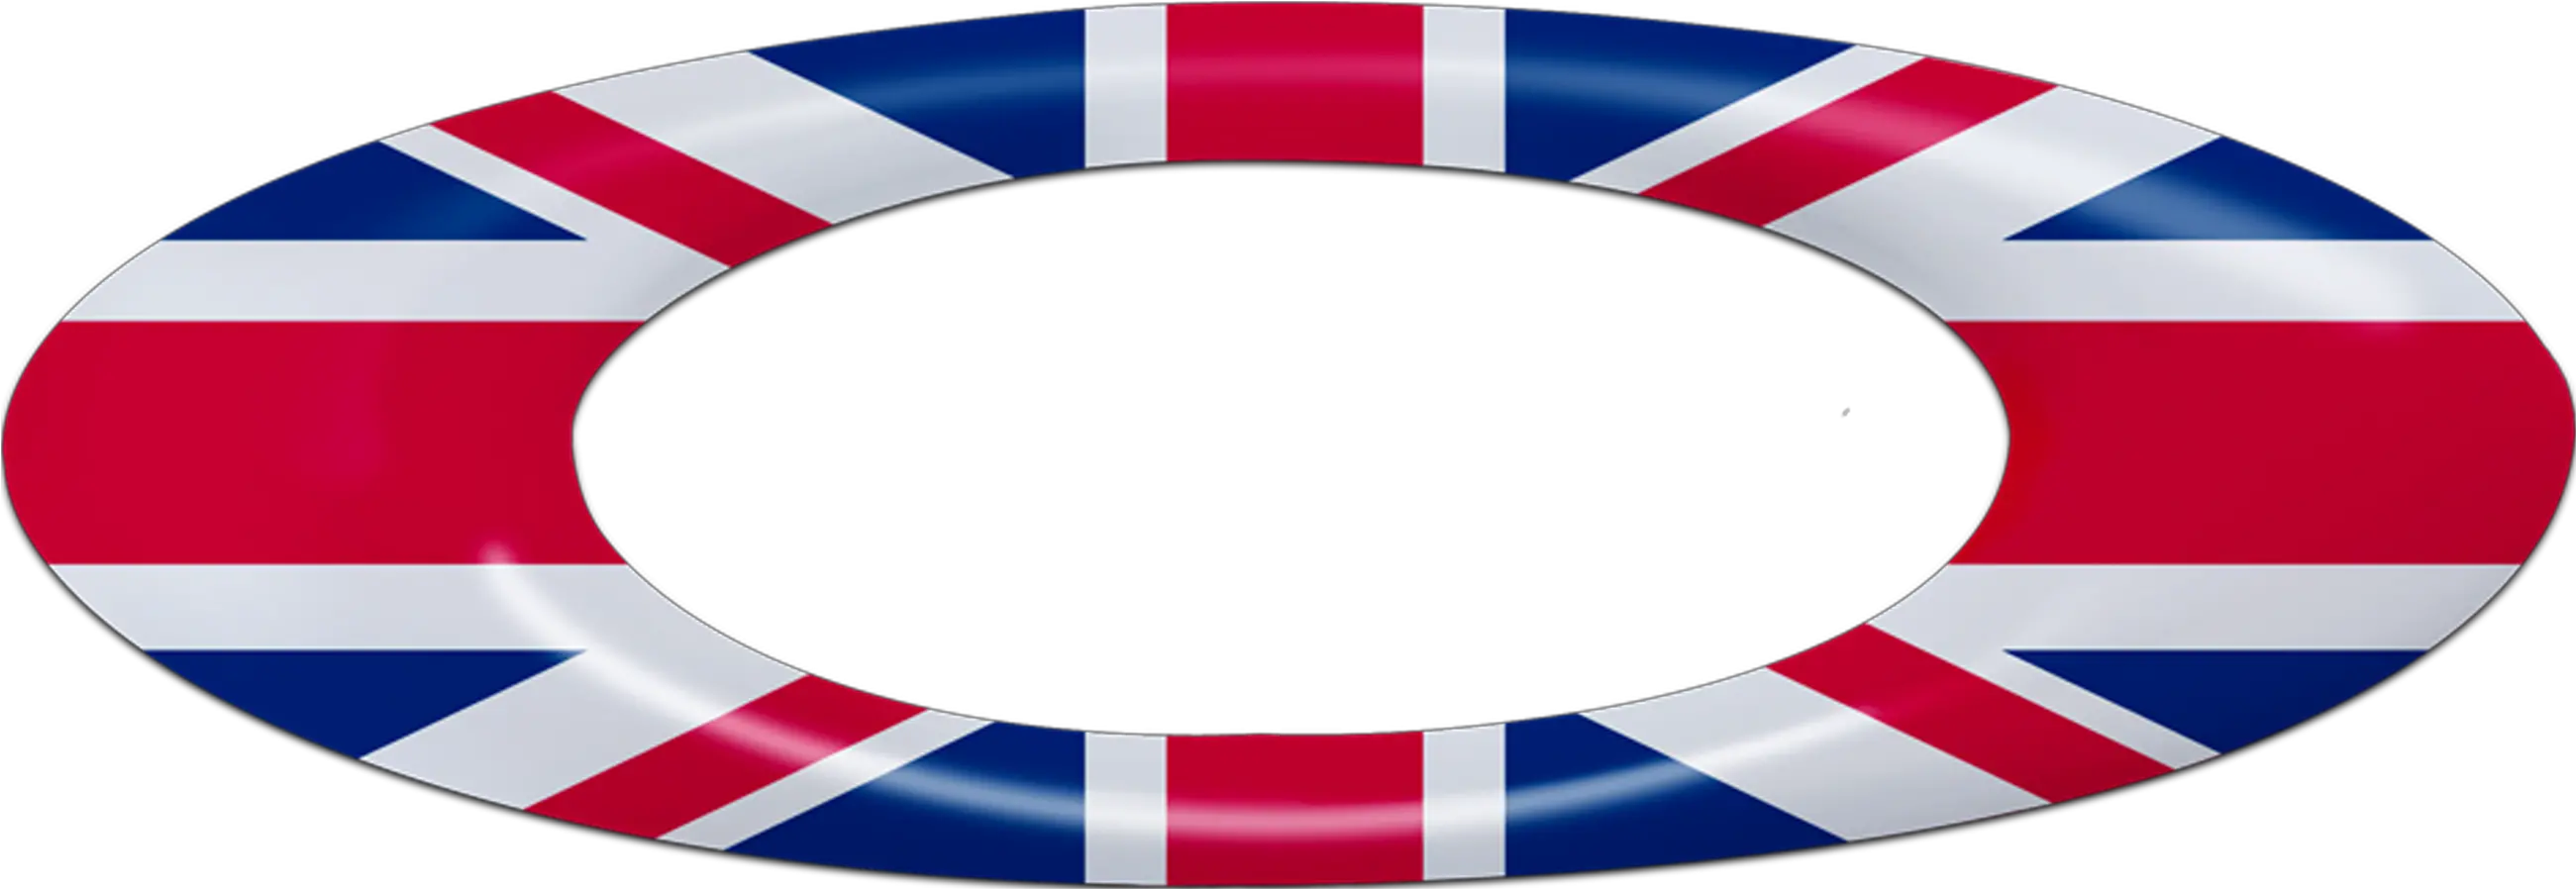 Oakley Flag Sticker Uk Flag Aoo0002et000085 Oakley Roe Store Oakley Stickers Country Flags Png Uk Flag Png Icon